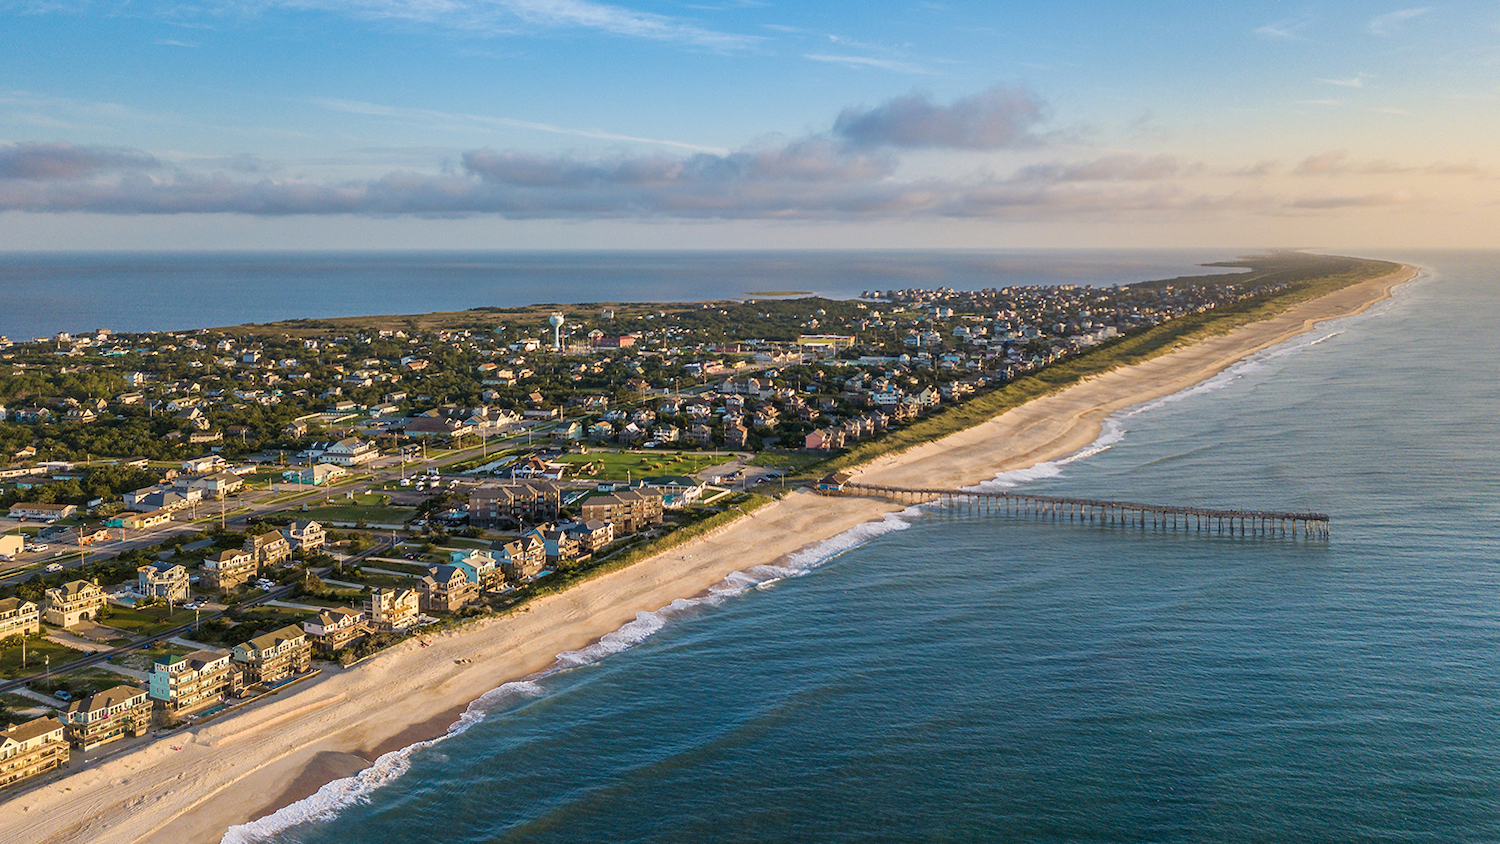 Aerial image of the Outer Banks - New Partnerships Aims to Ensure Sustainable Future for the Outer Banks of North Carolina - Parks, Recreation and Tourism Management at NC State University